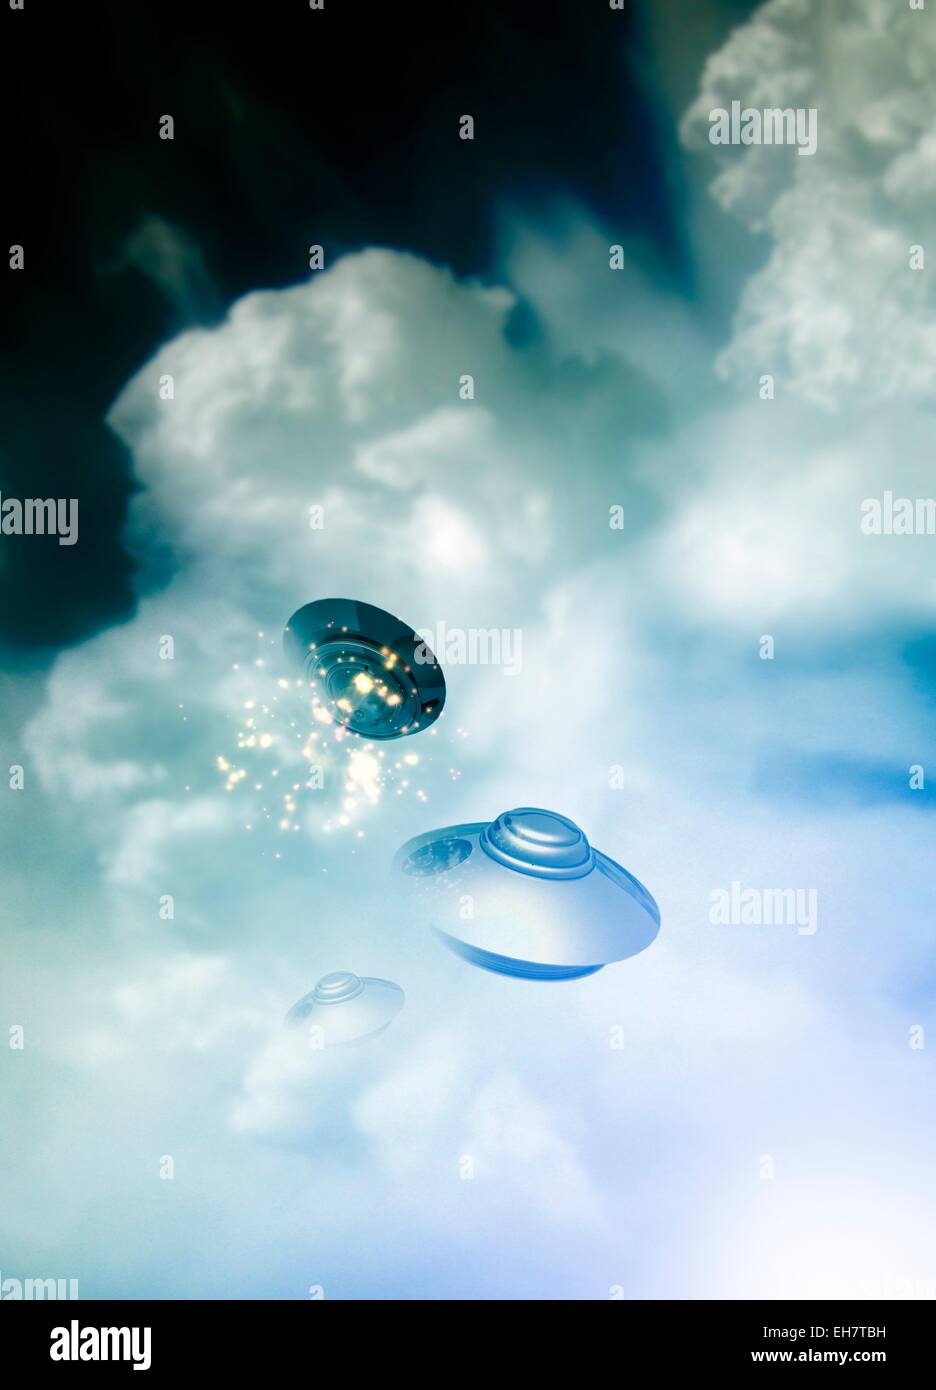 UFOs in the cloud, illustration Stock Photo